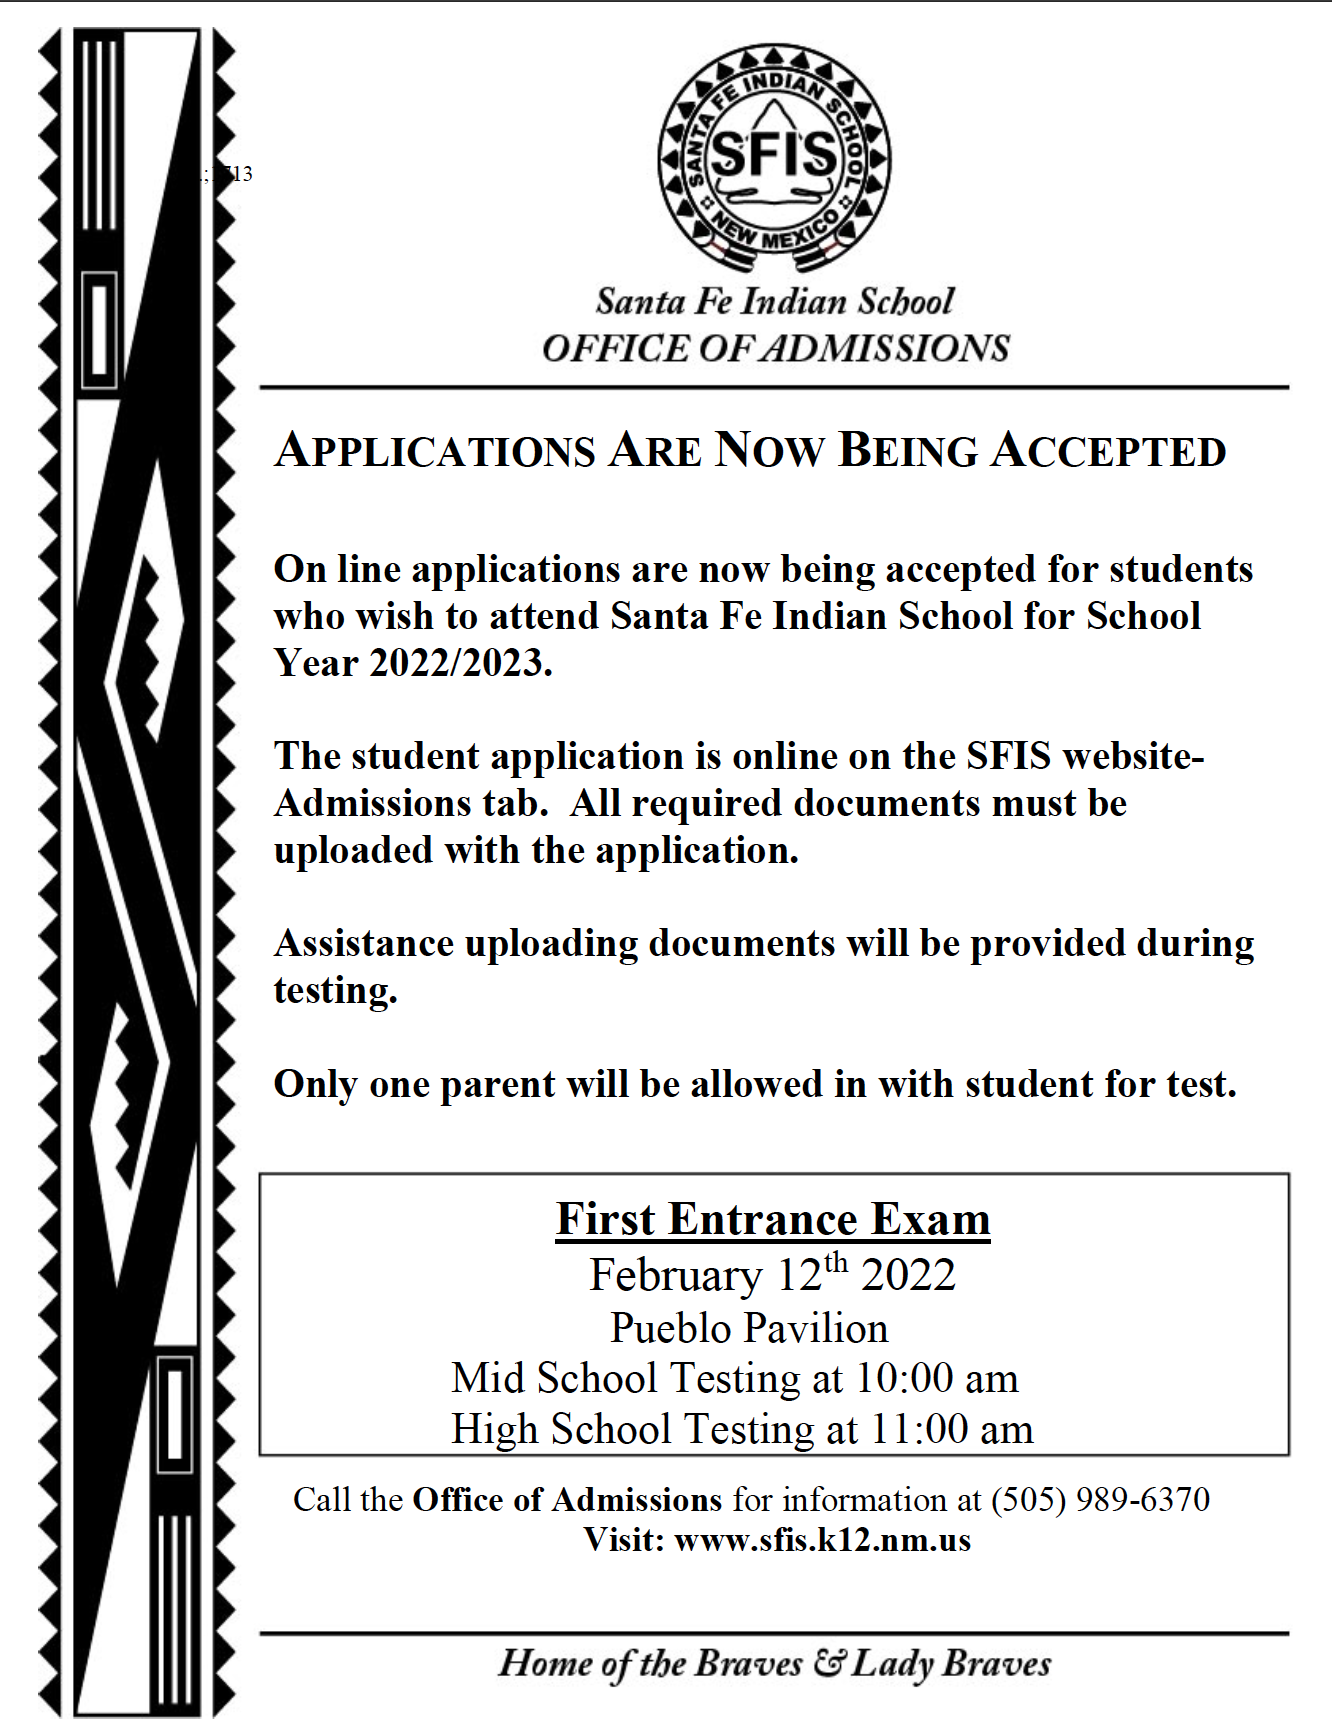 Admissions Flyer